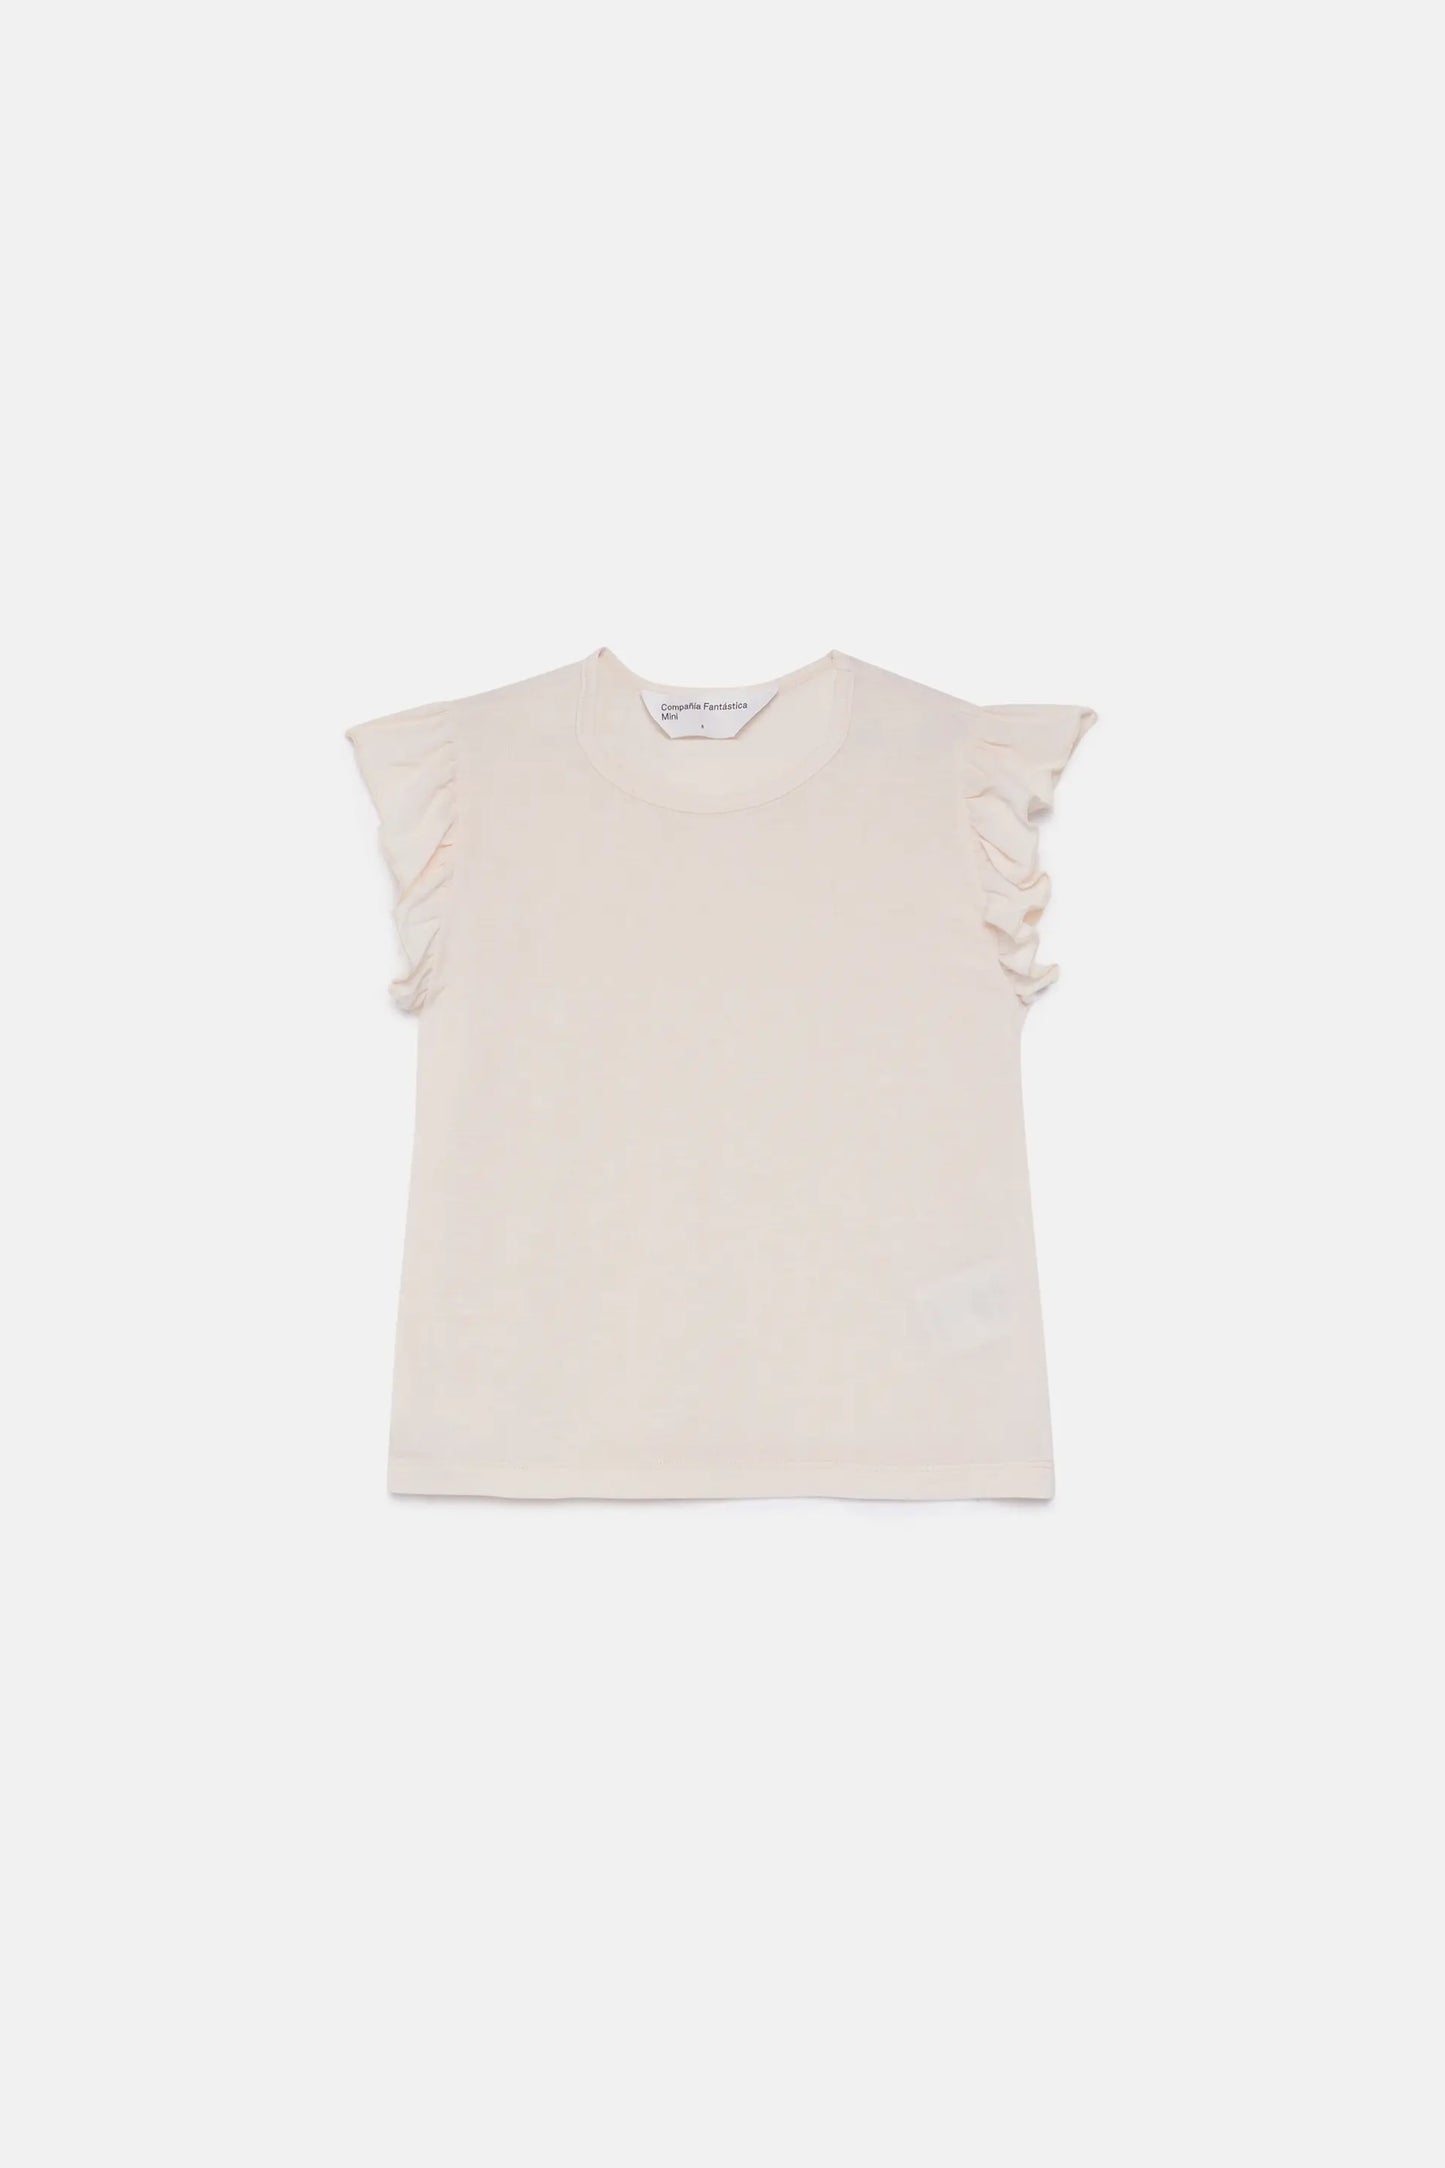 Girl's top with white ruffles